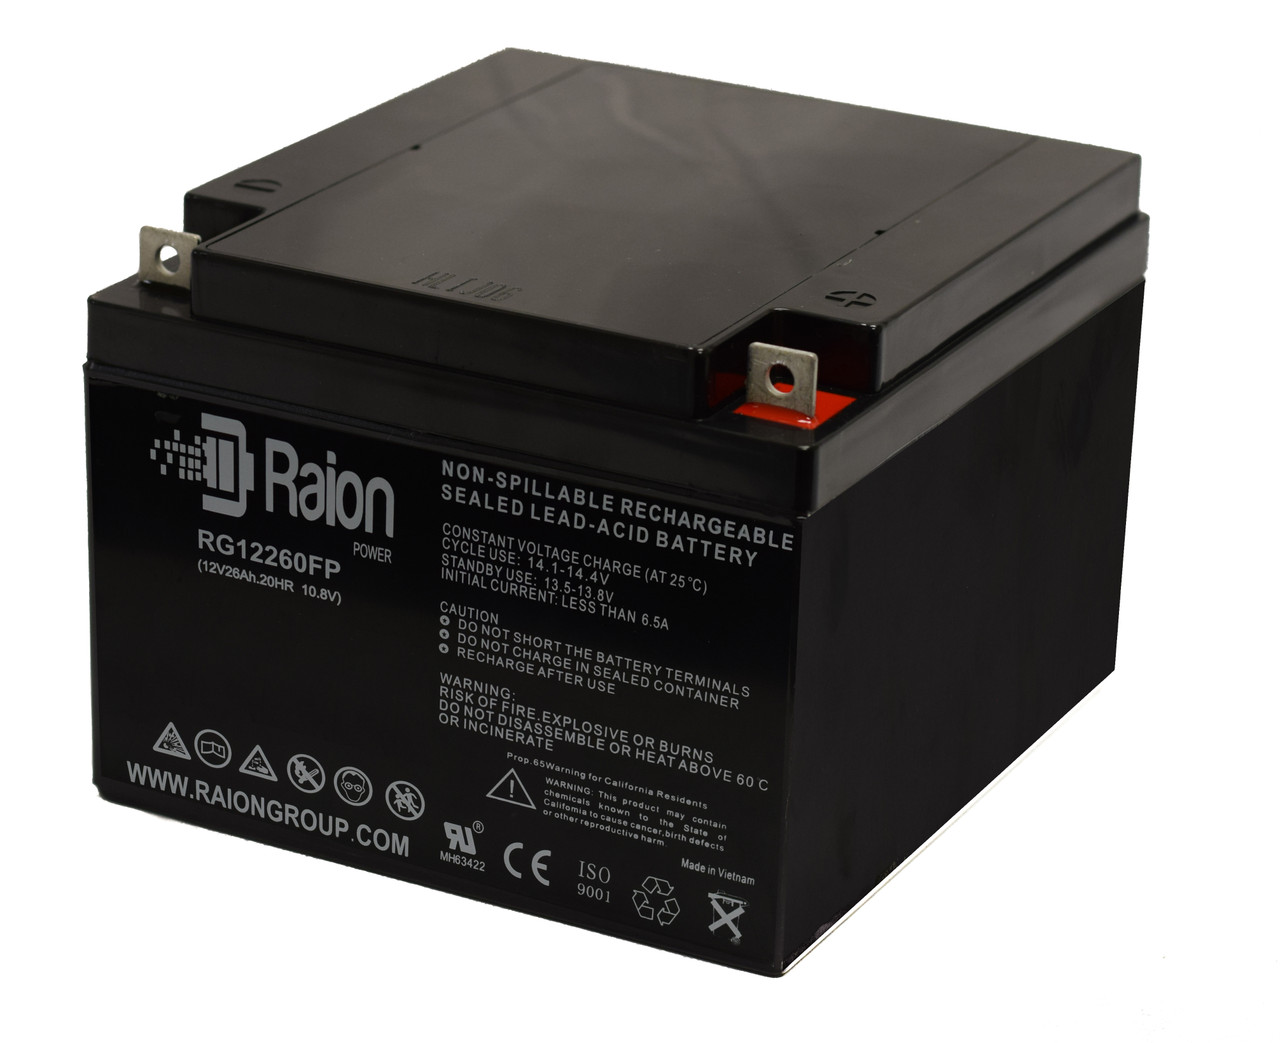 Raion Power Replacement 12V 26Ah Battery for Zeus PC26-12NB - 1 Pack